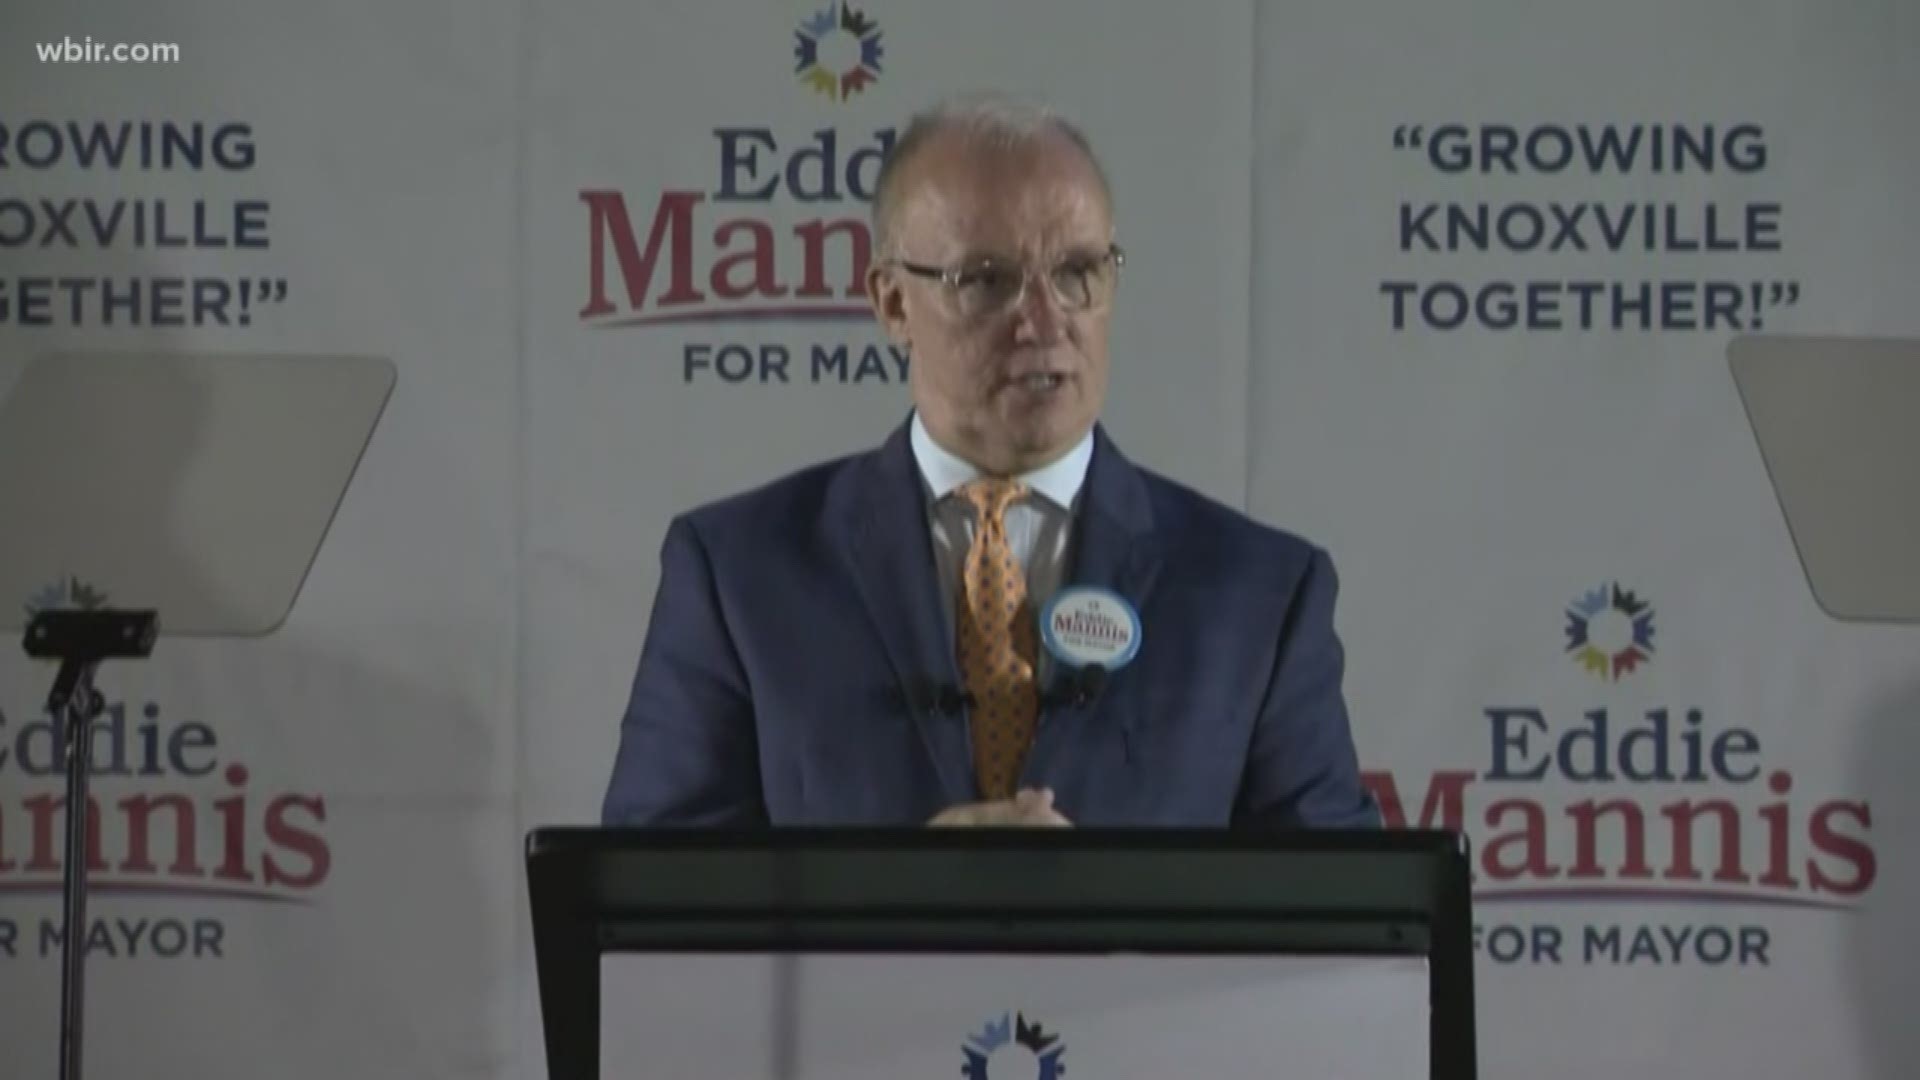 Eddie Mannis took the stage after his primary win to address his supporters, and looks ahead to the November elections.